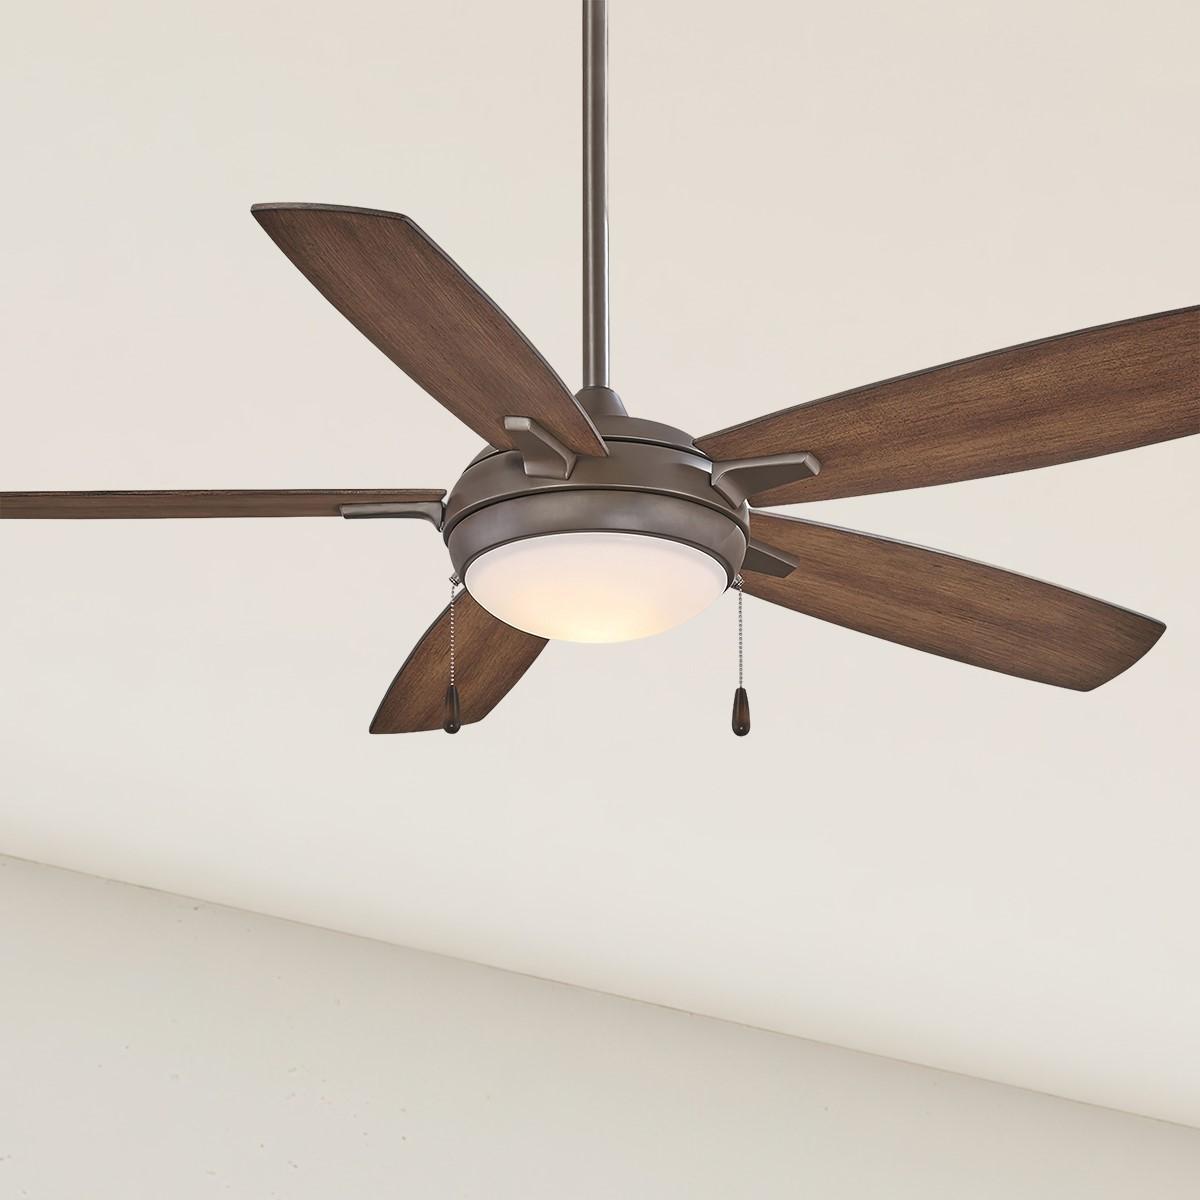 Lun Aire 54 Inch Modern Ceiling Fan With Light